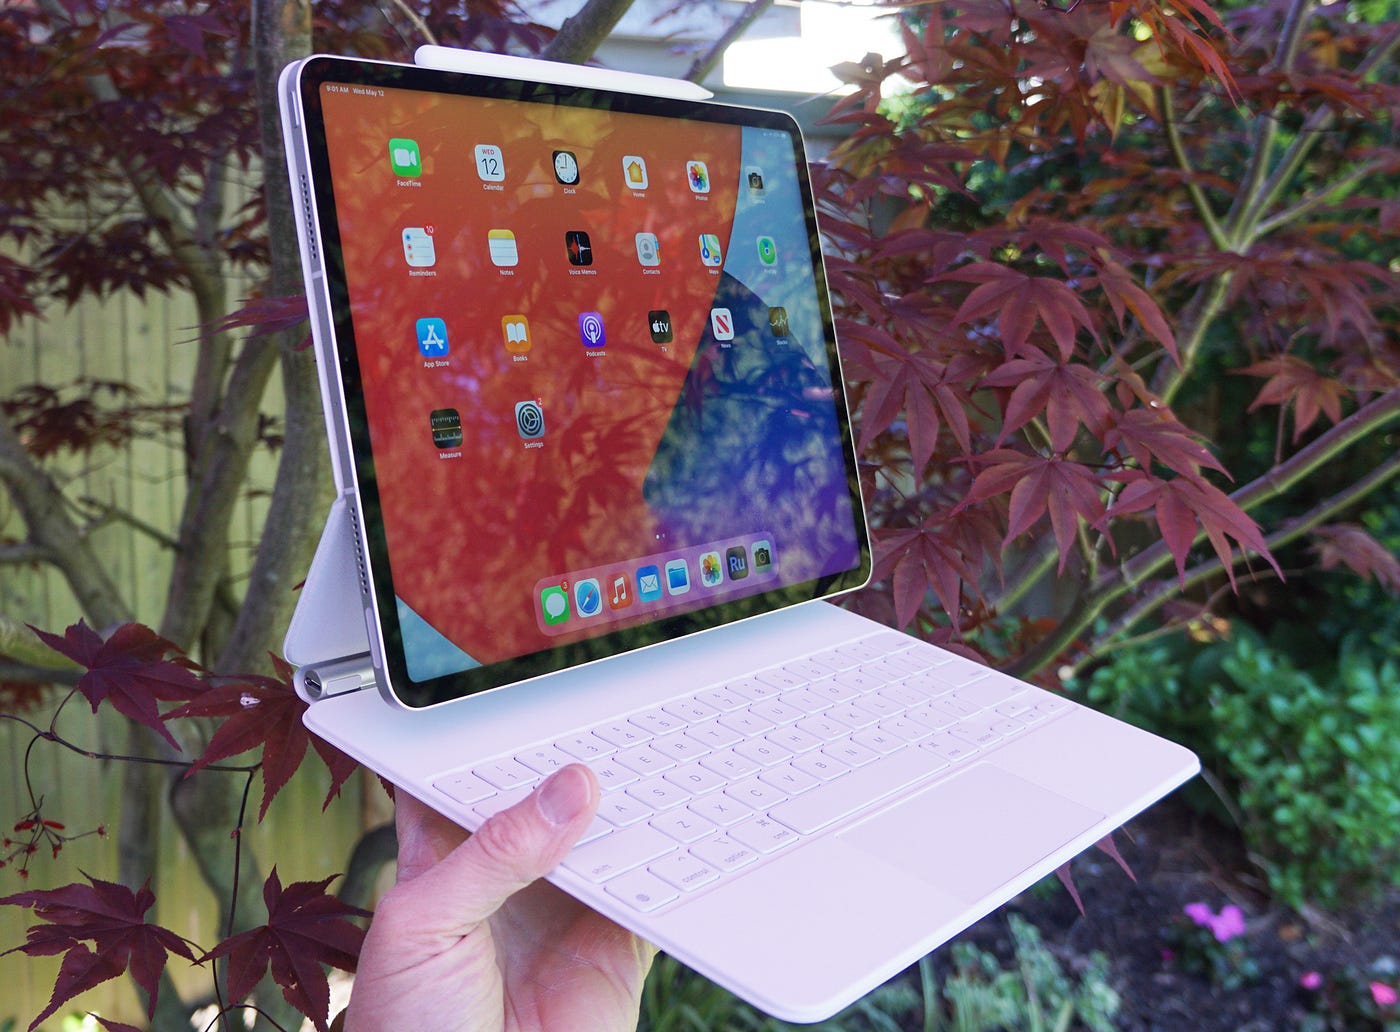 Apple iPad Pro 12.9 5th Generation Review: Say Hello to the Laptop Killer, by Lance Ulanoff